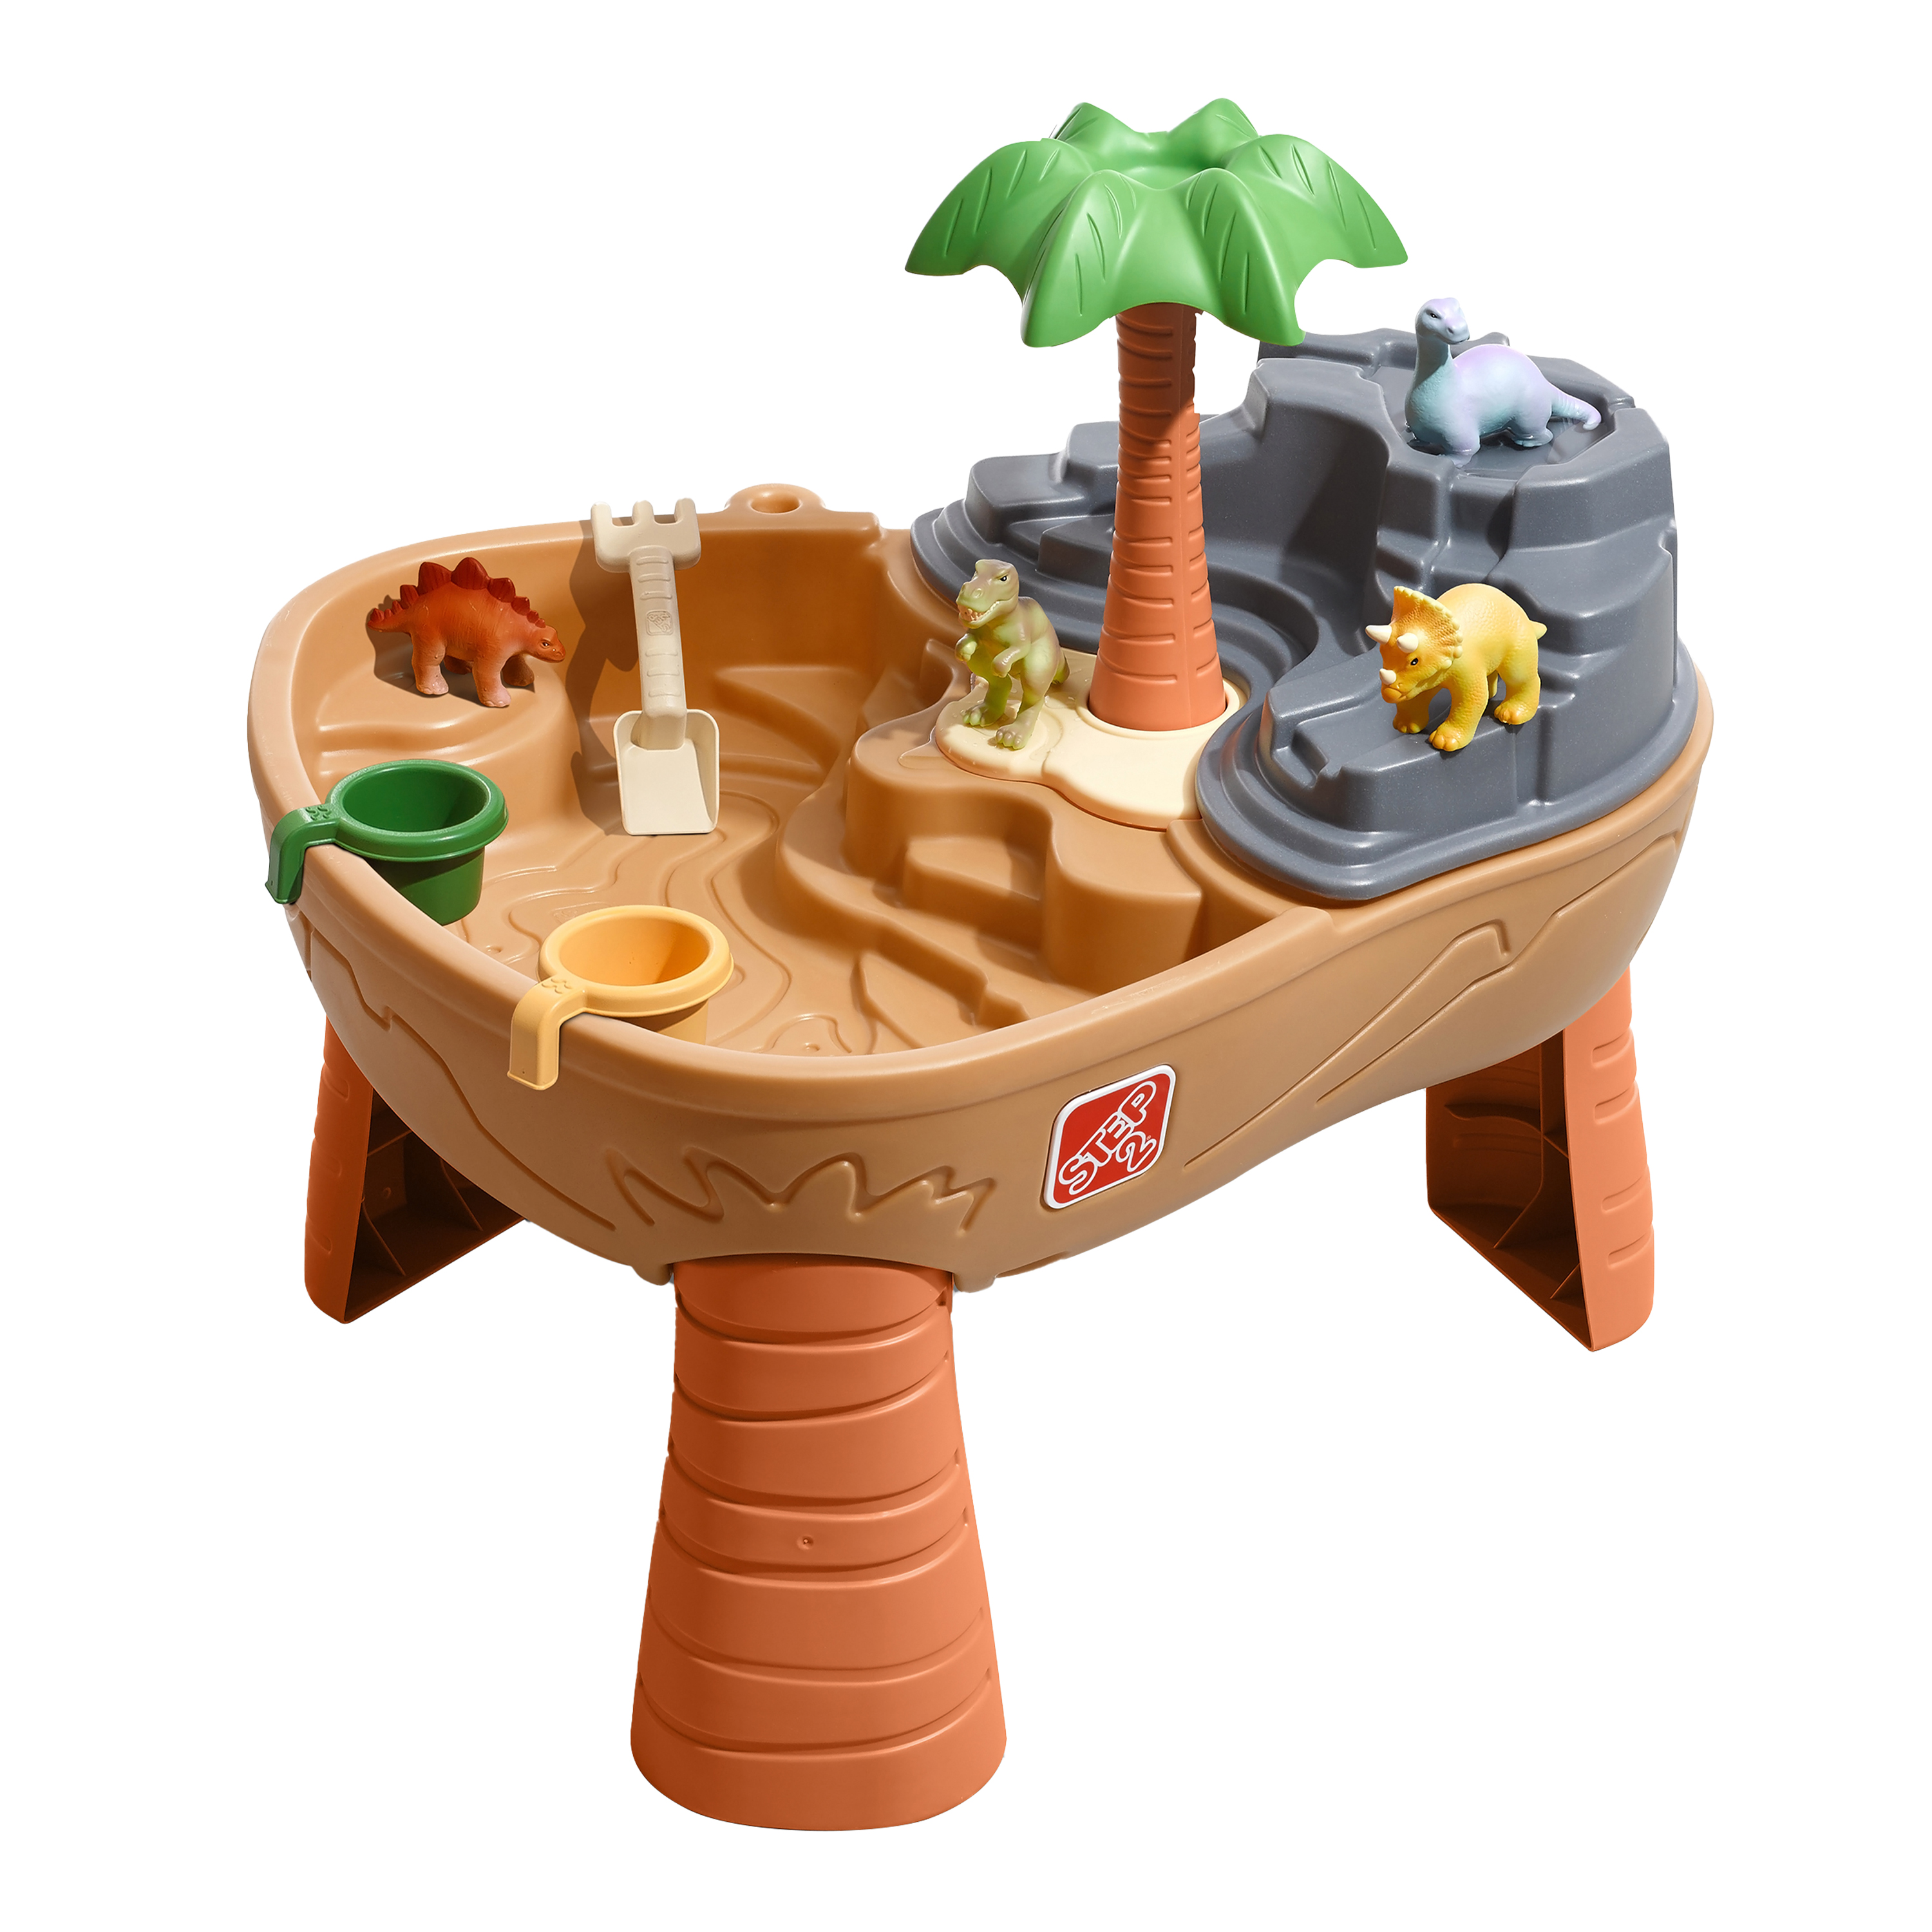 Dino Dig Sand & Water Table